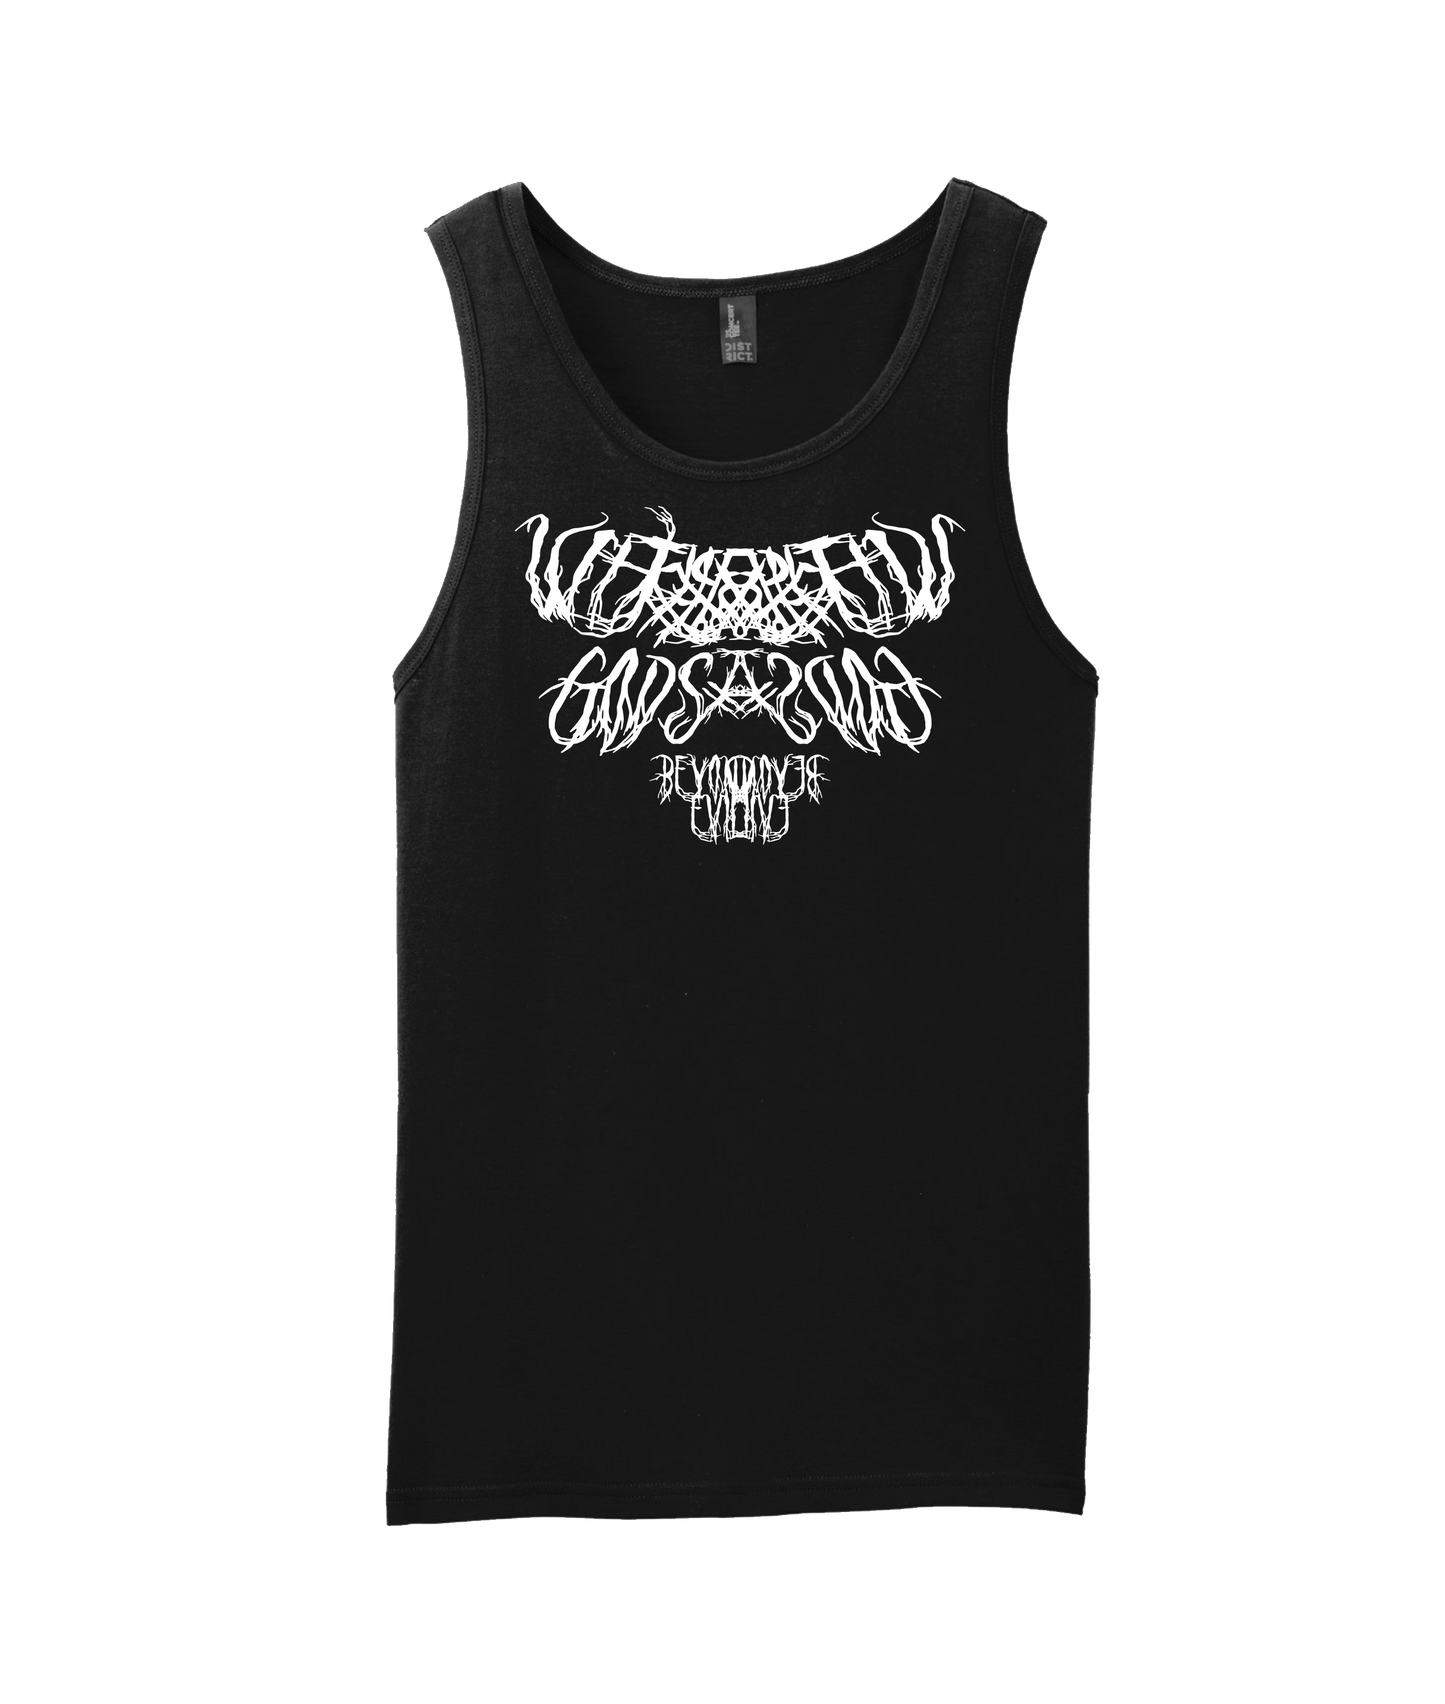 Withered Gods - Logo - Black Tank Top